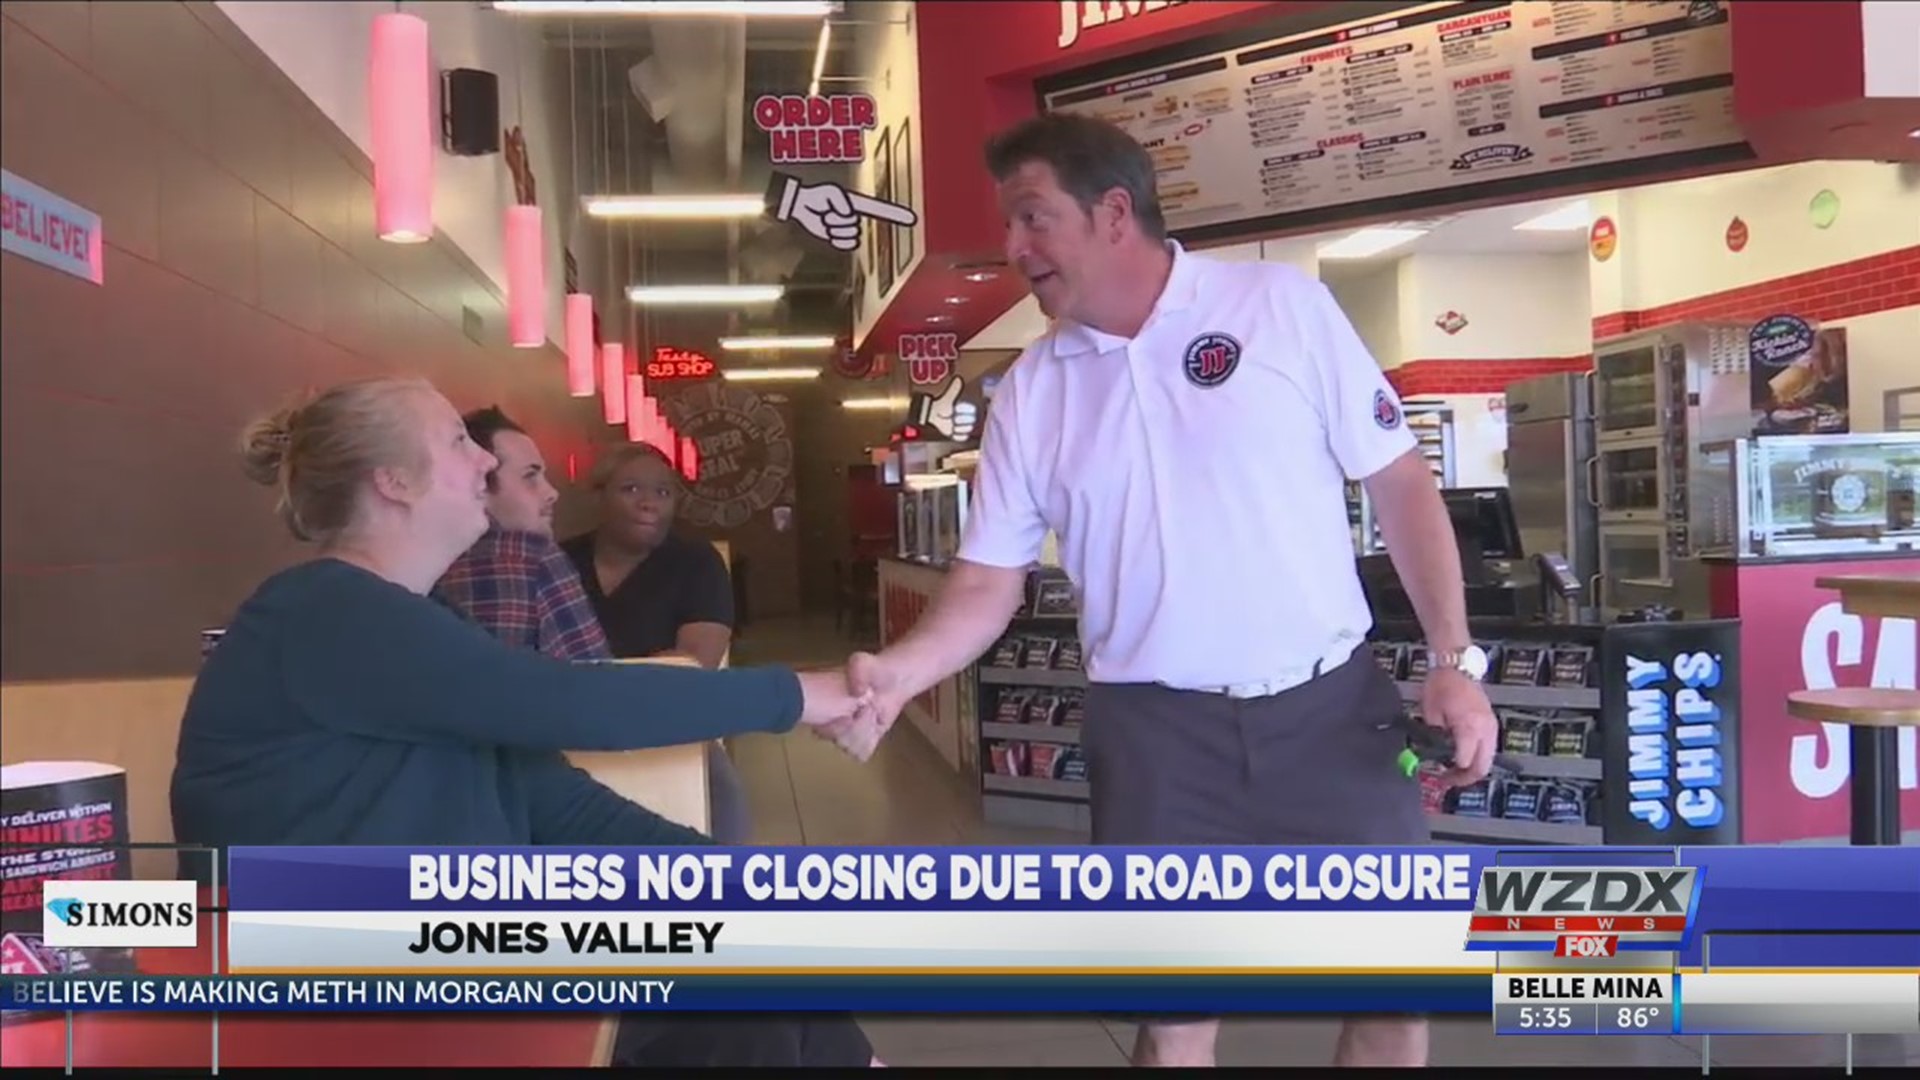 There's been a change of heart about closing the Jimmy Johns in Jones Valley.